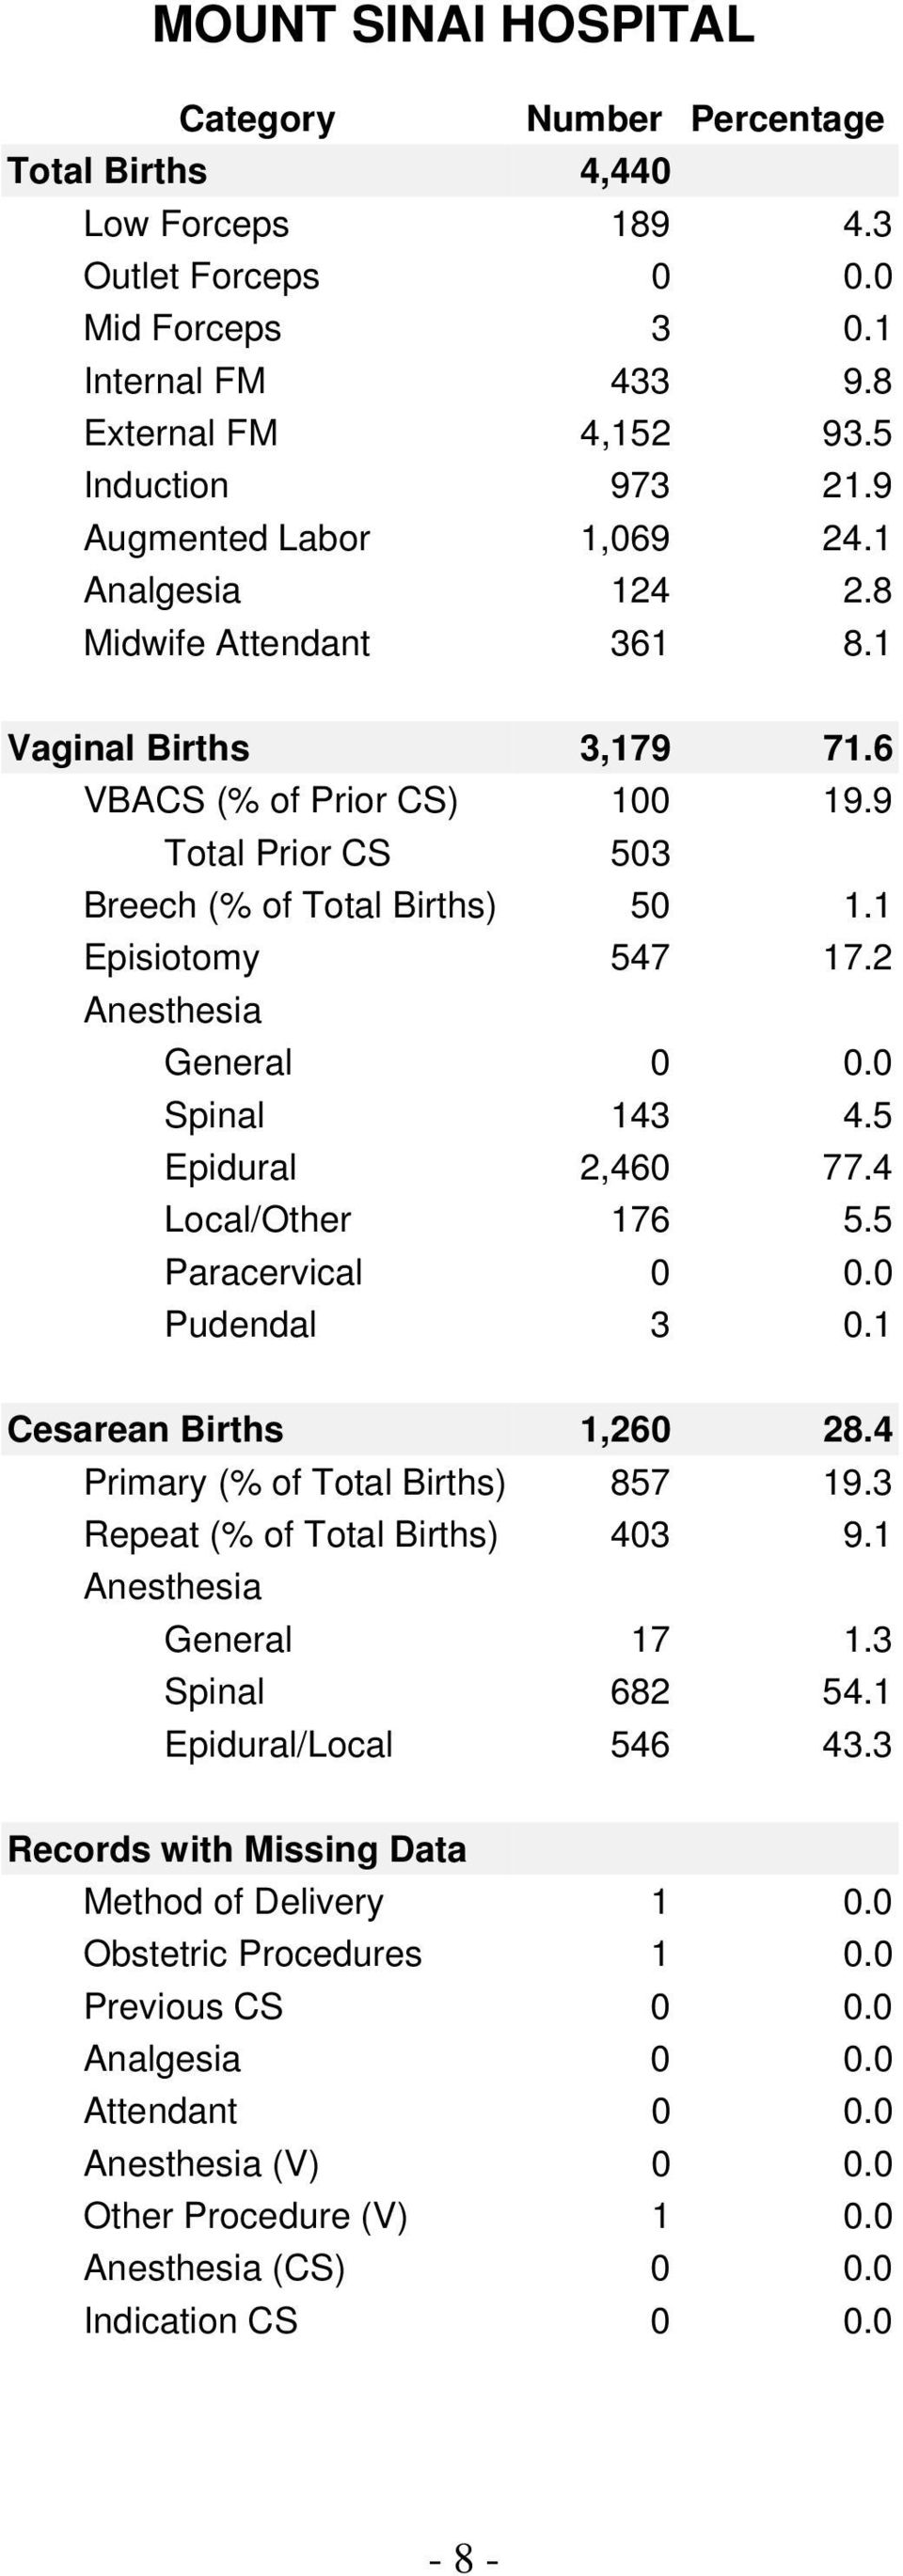 2 General 0 0.0 Spinal 143 4.5 Epidural 2,460 77.4 Local/Other 176 5.5 Pudendal 3 0.1 Cesarean Births 1,260 28.4 Primary (% of Total Births) 857 19.